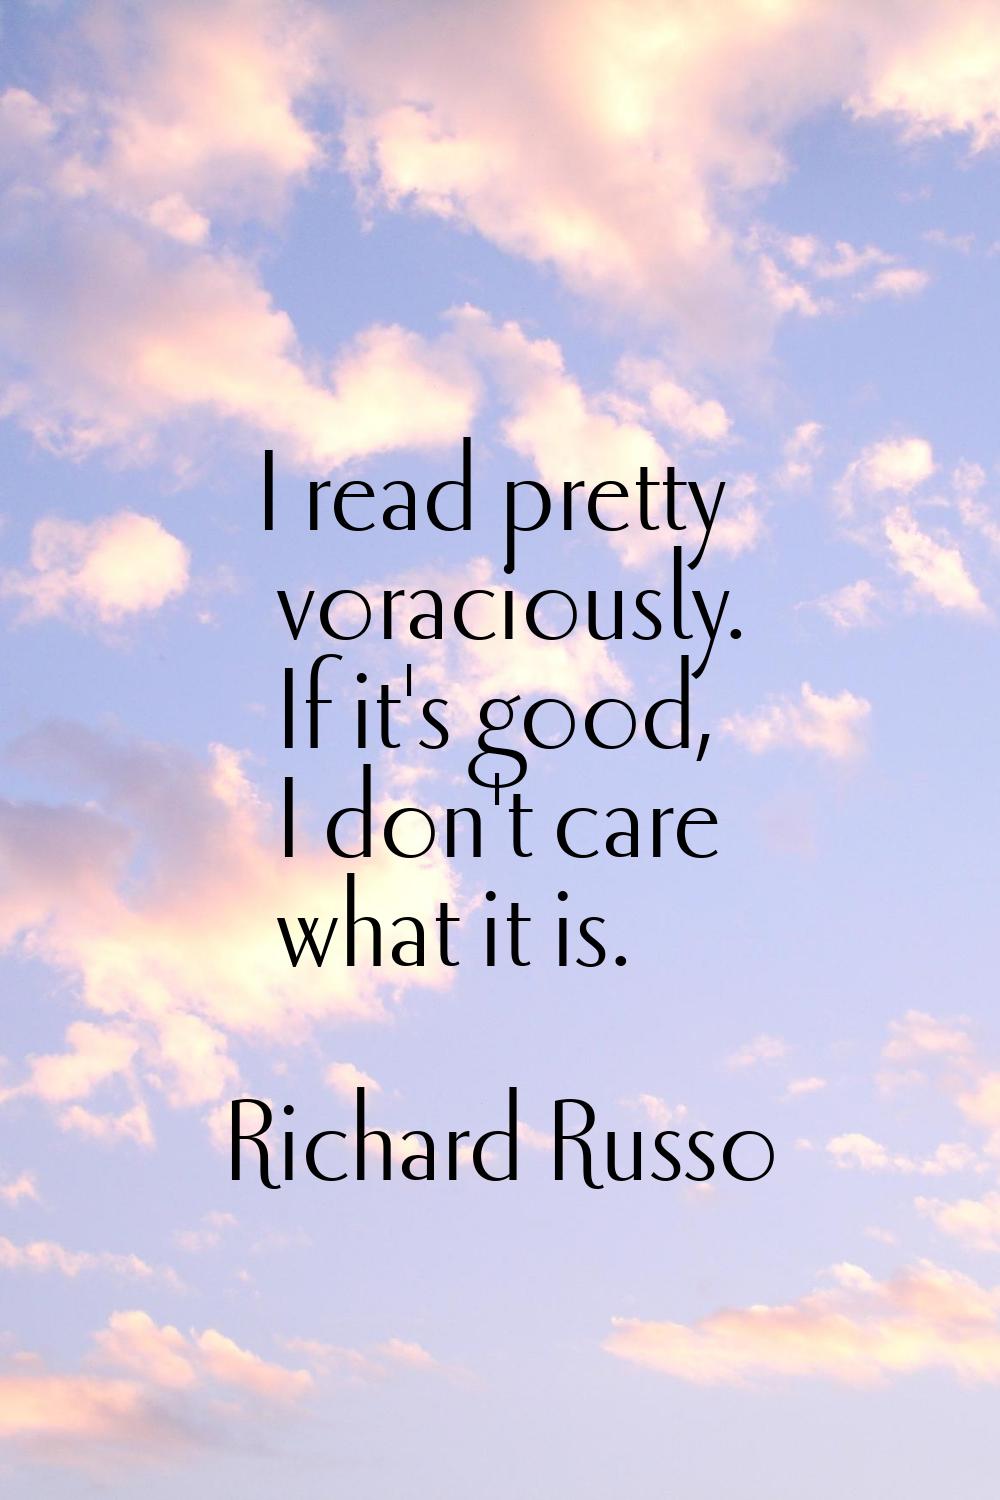 I read pretty voraciously. If it's good, I don't care what it is.